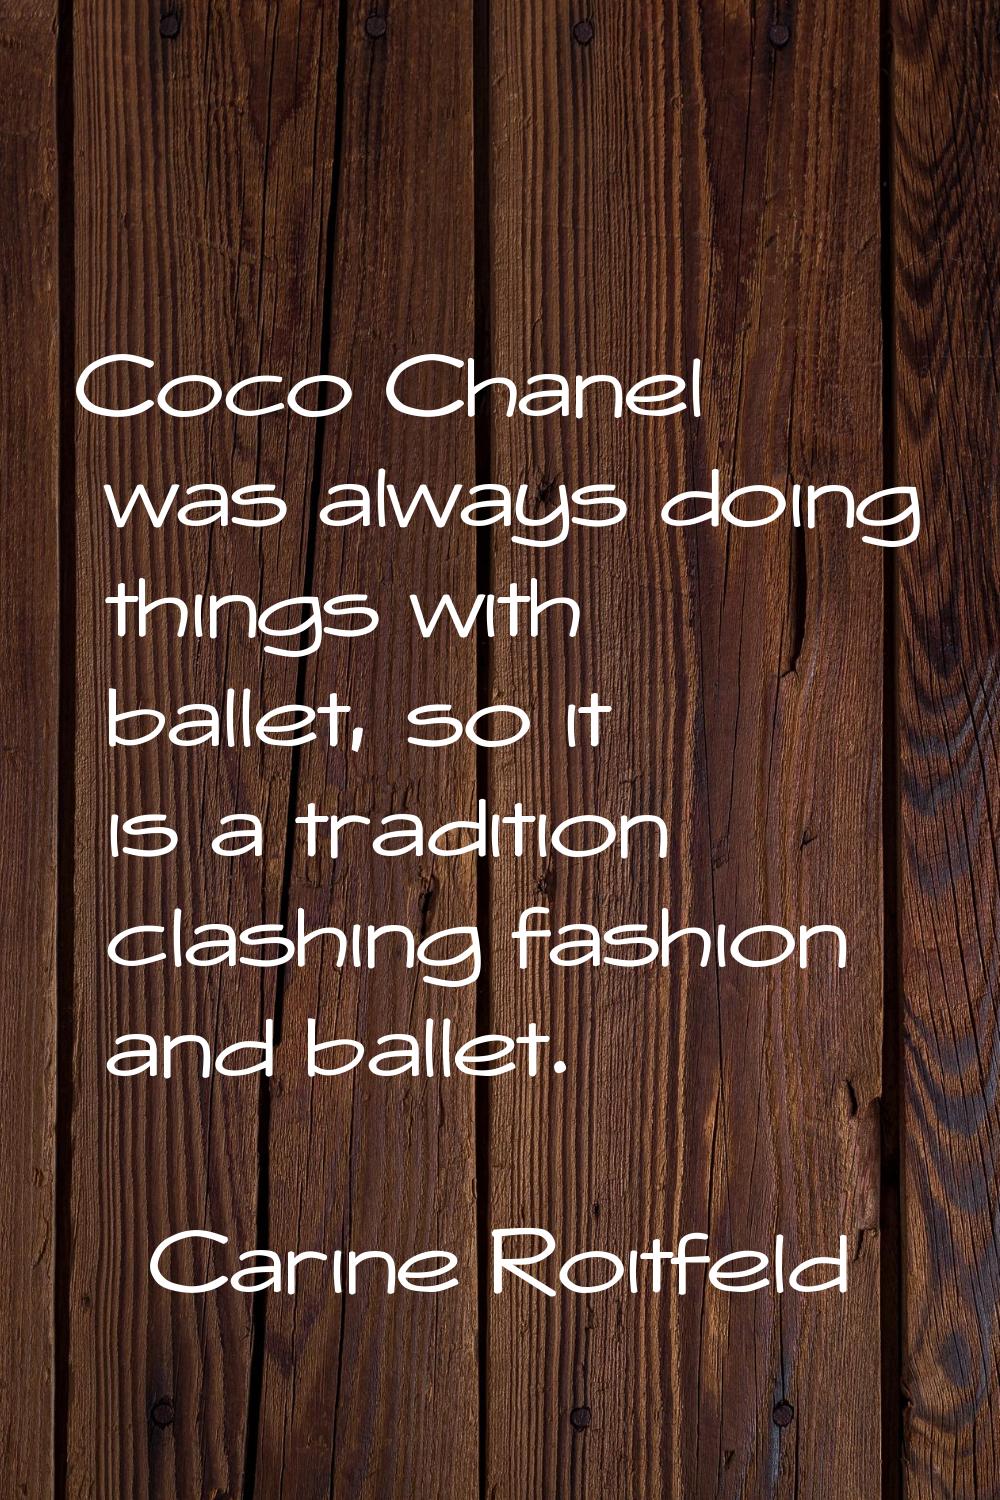 Coco Chanel was always doing things with ballet, so it is a tradition clashing fashion and ballet.